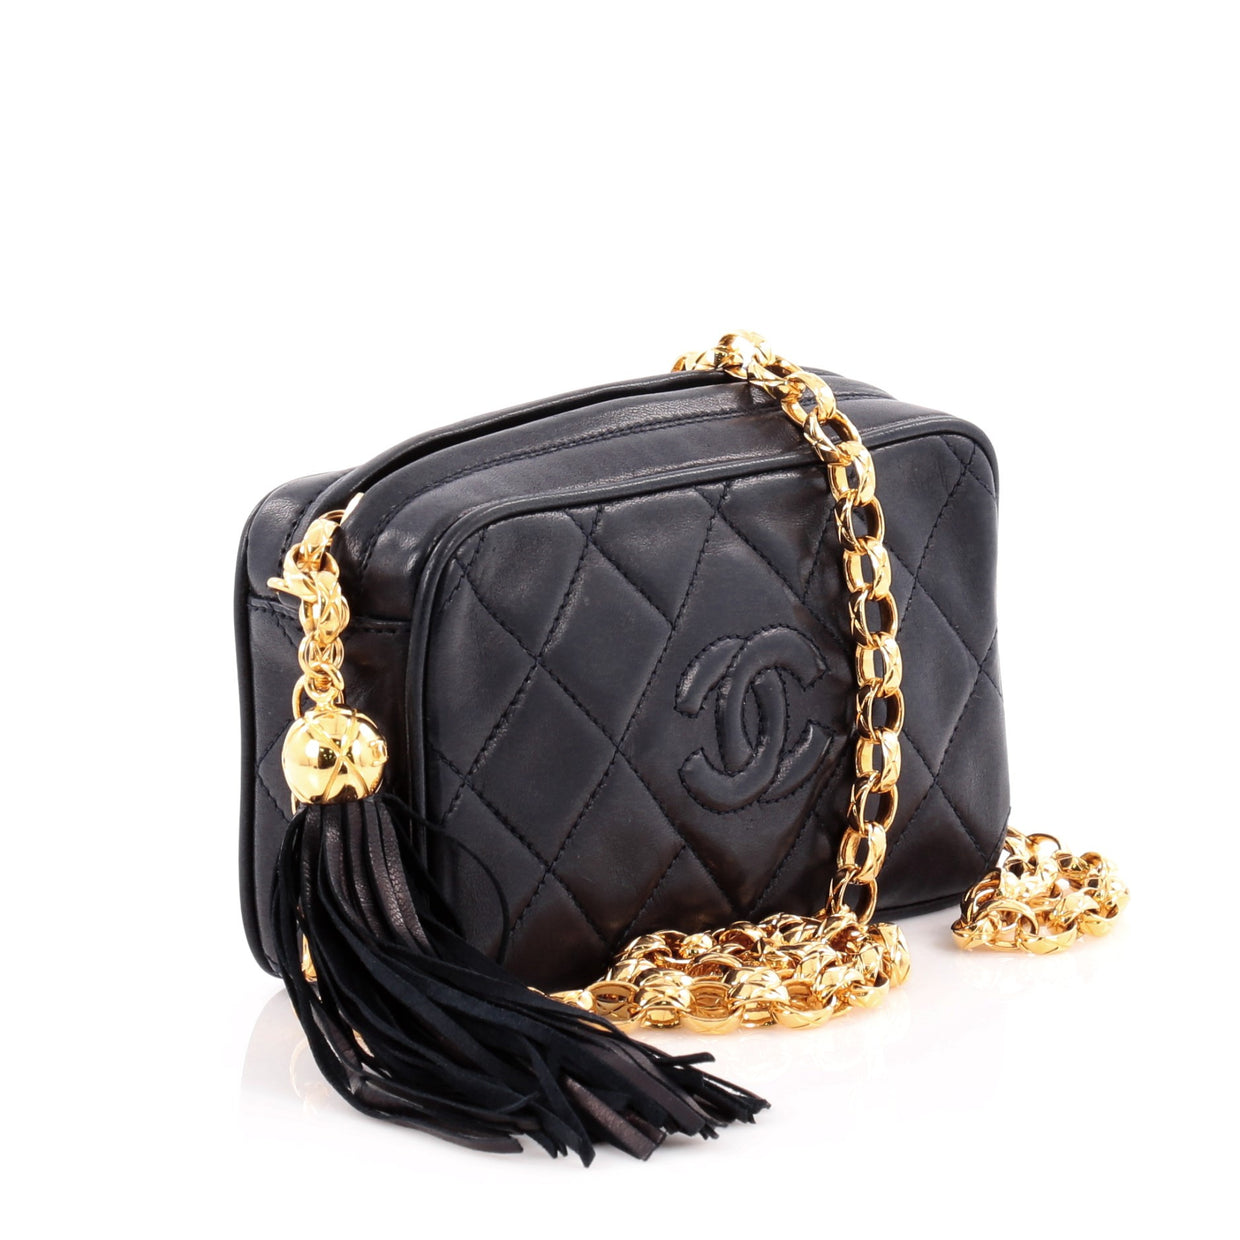 Chanel Vintage Diamond CC Camera Bag Quilted Leather Mini - Rebag